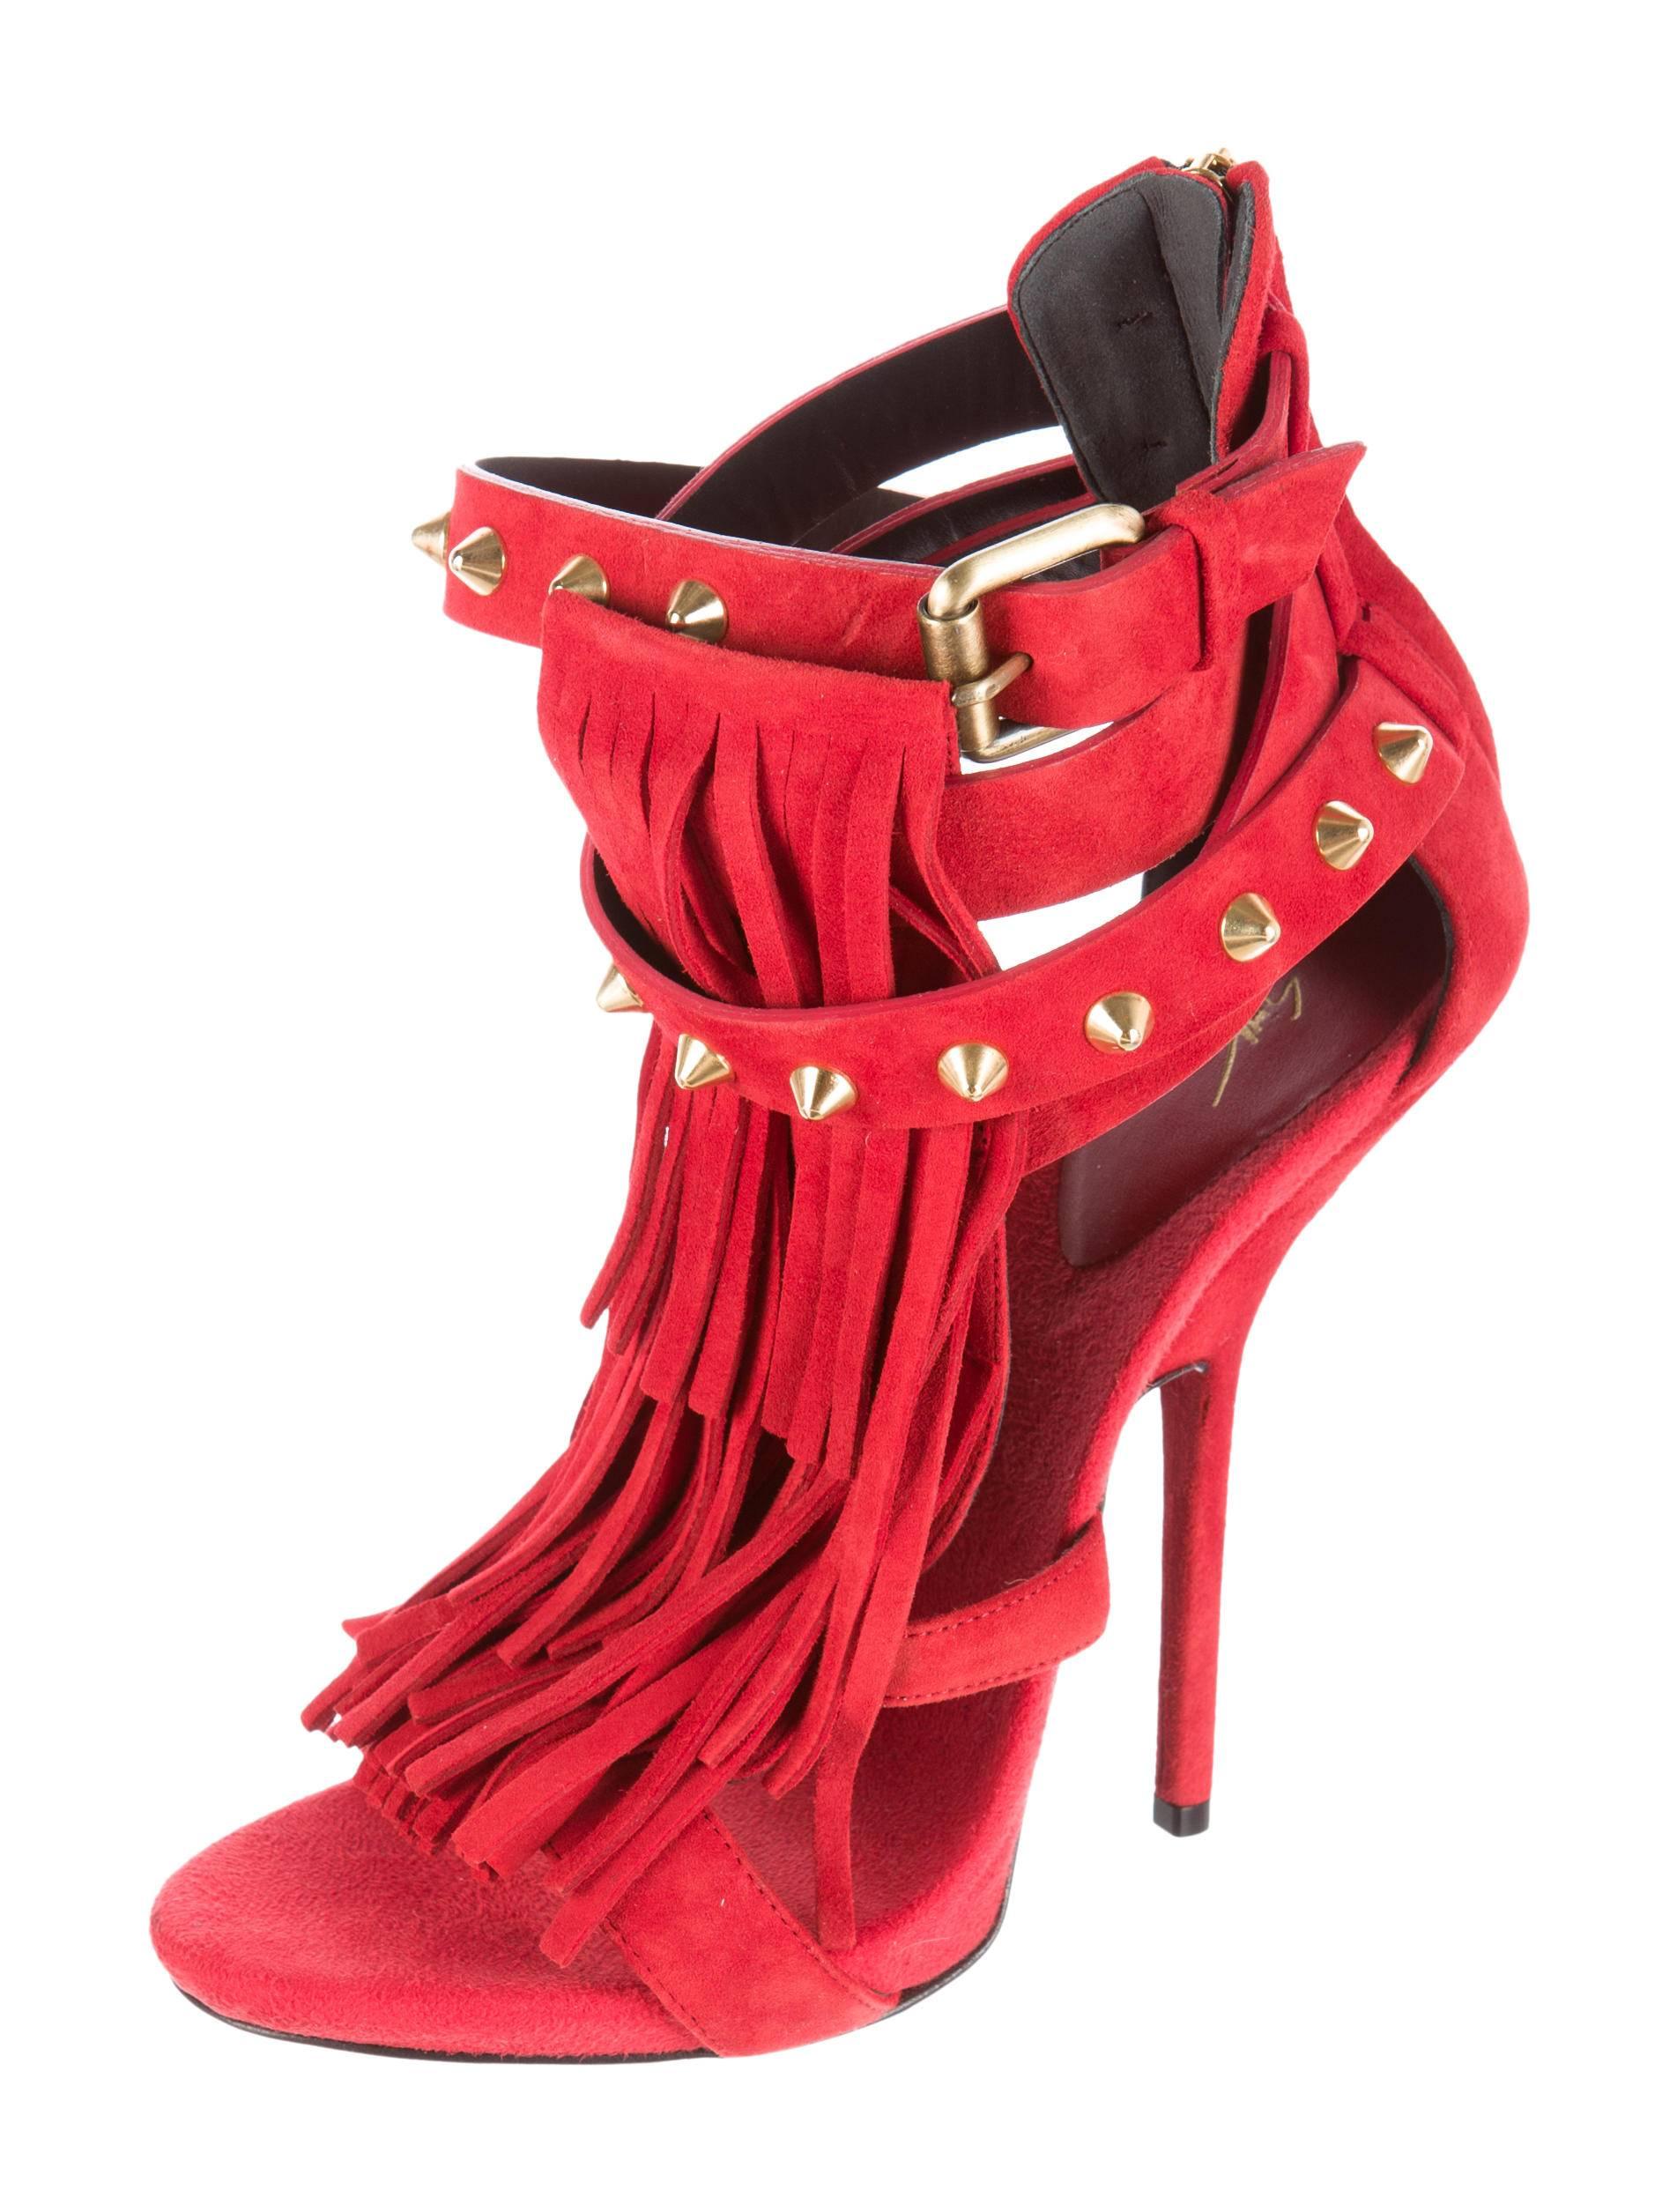 CURATOR'S NOTES

Giuseppe Zanotti New Red Suede Stud Tassel Sandals Heels in Box  

Size IT 39
Suede
Gold tone hardware
Buckle and zip closure
Made in Italy 
Heel height 5.25"
Includes original Giuseppe Zanotti dust bag and box 